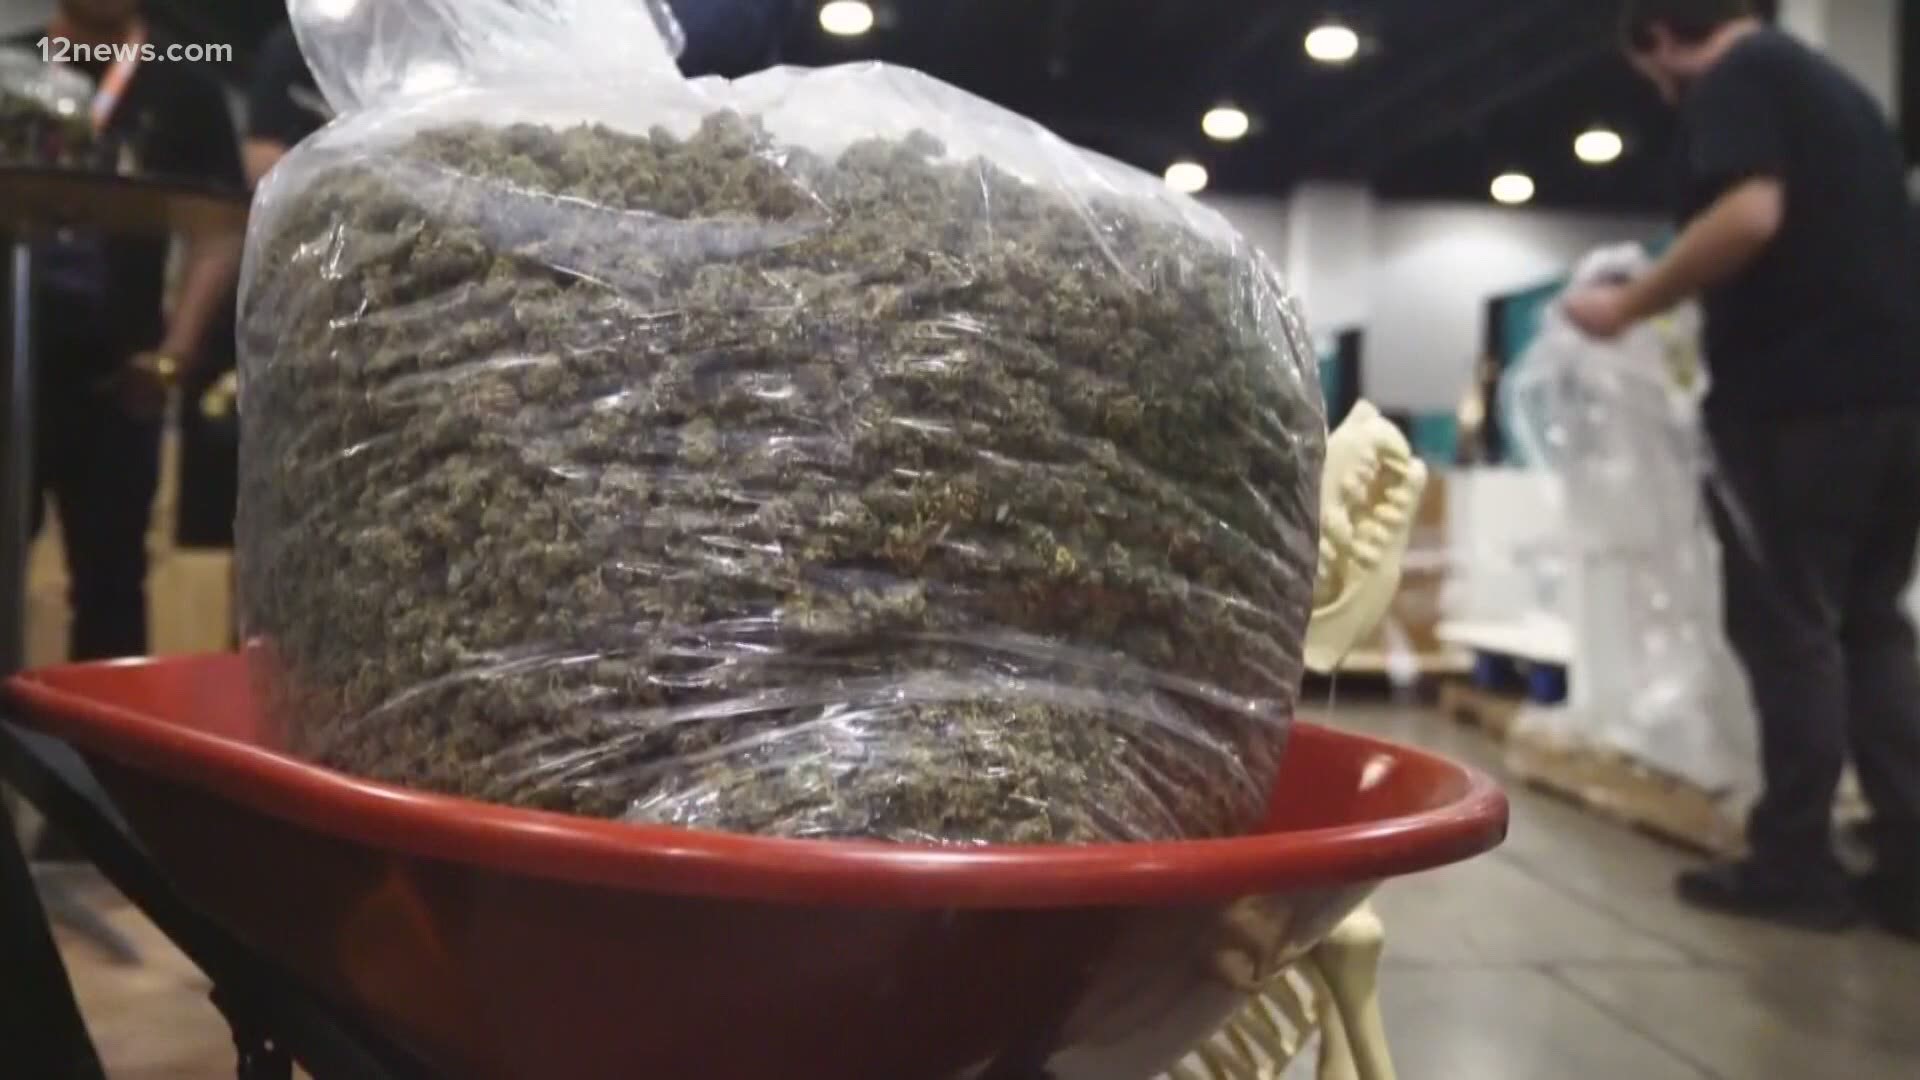 Many shops are hopeful Friday is the day that the state gives them the green thumbs up to sell recreational marijuana for the first time in Arizona's history.